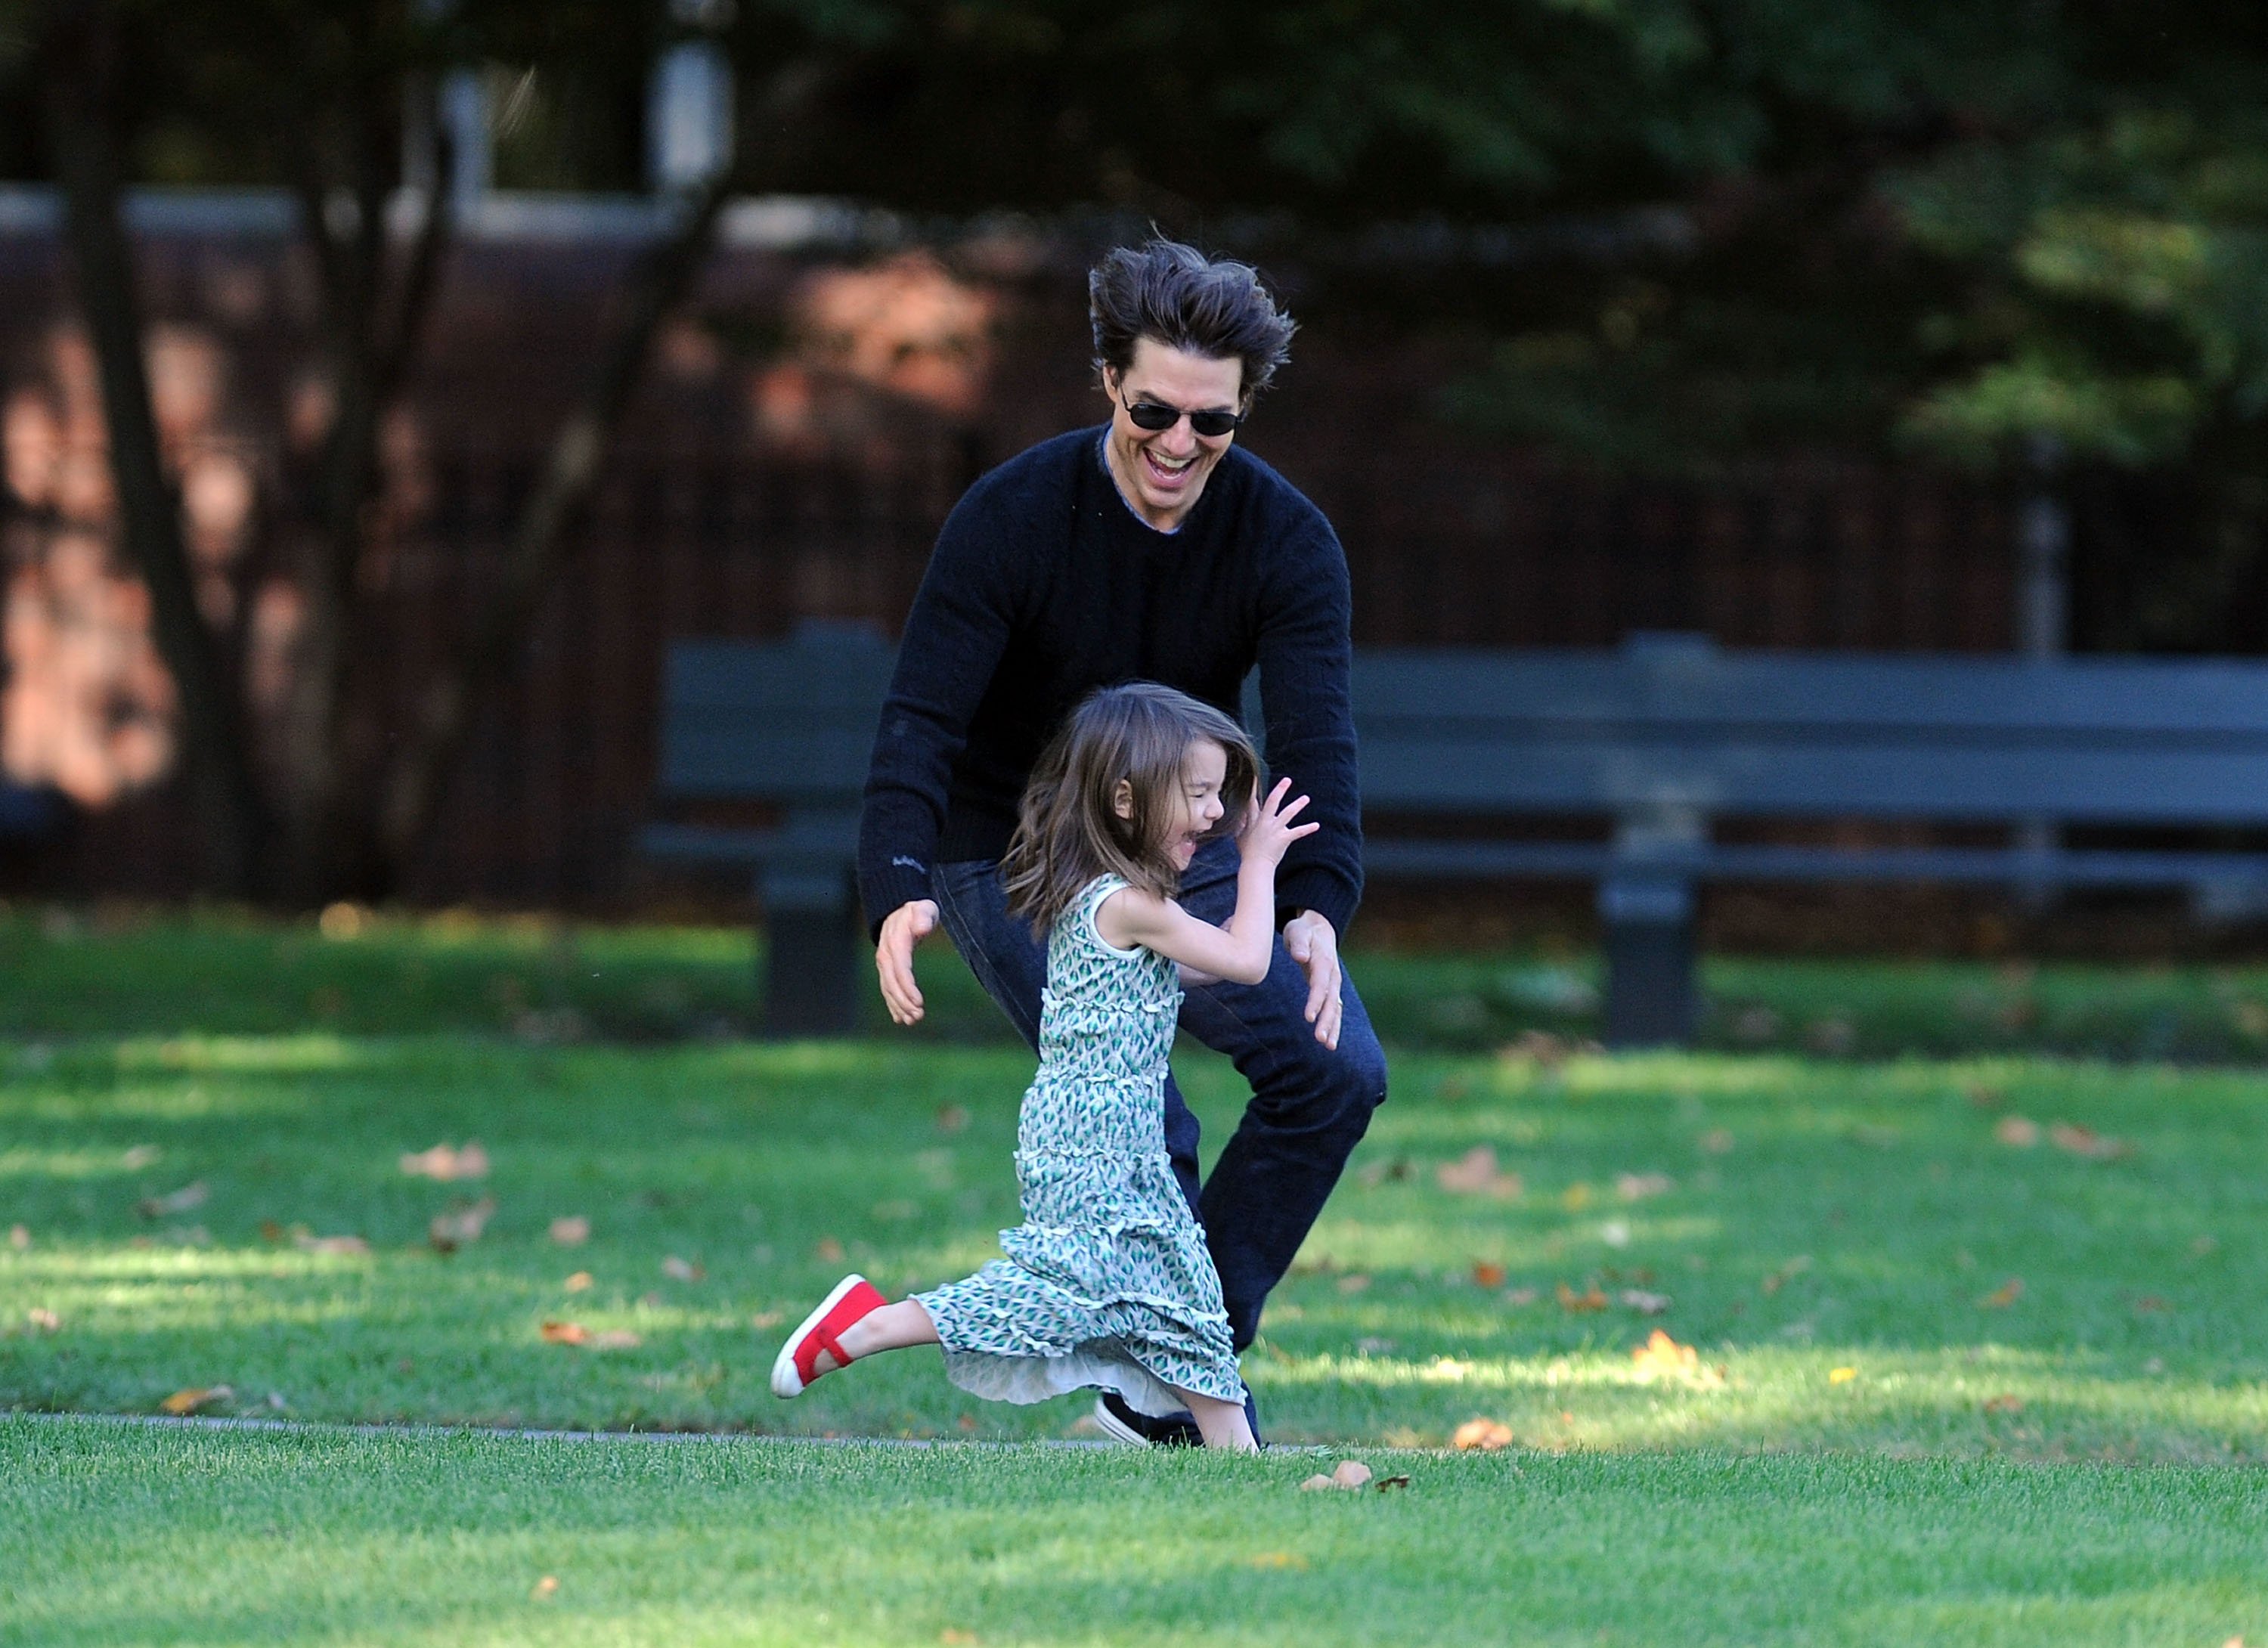 Tom Cruise and Suri Cruise visit Charles River Basin on October 10, 2009 in Cambridge, Massachusetts. | Source: Getty Images